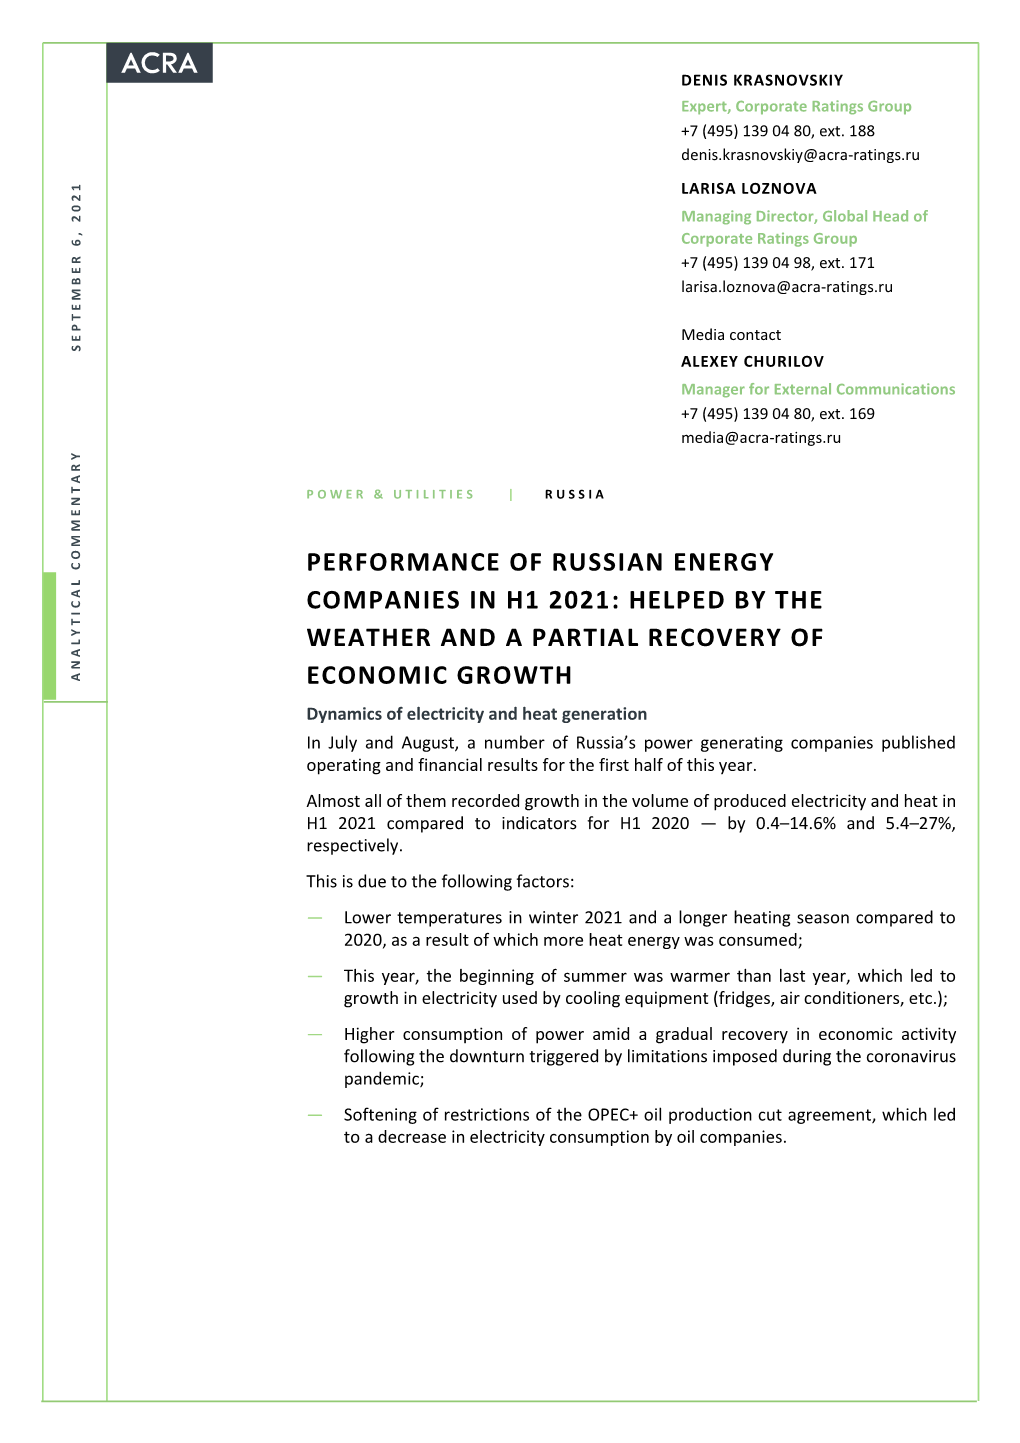 Performance of Russian Energy Companies in H1 2021: Helped by the Weather and a Partial Recovery Of